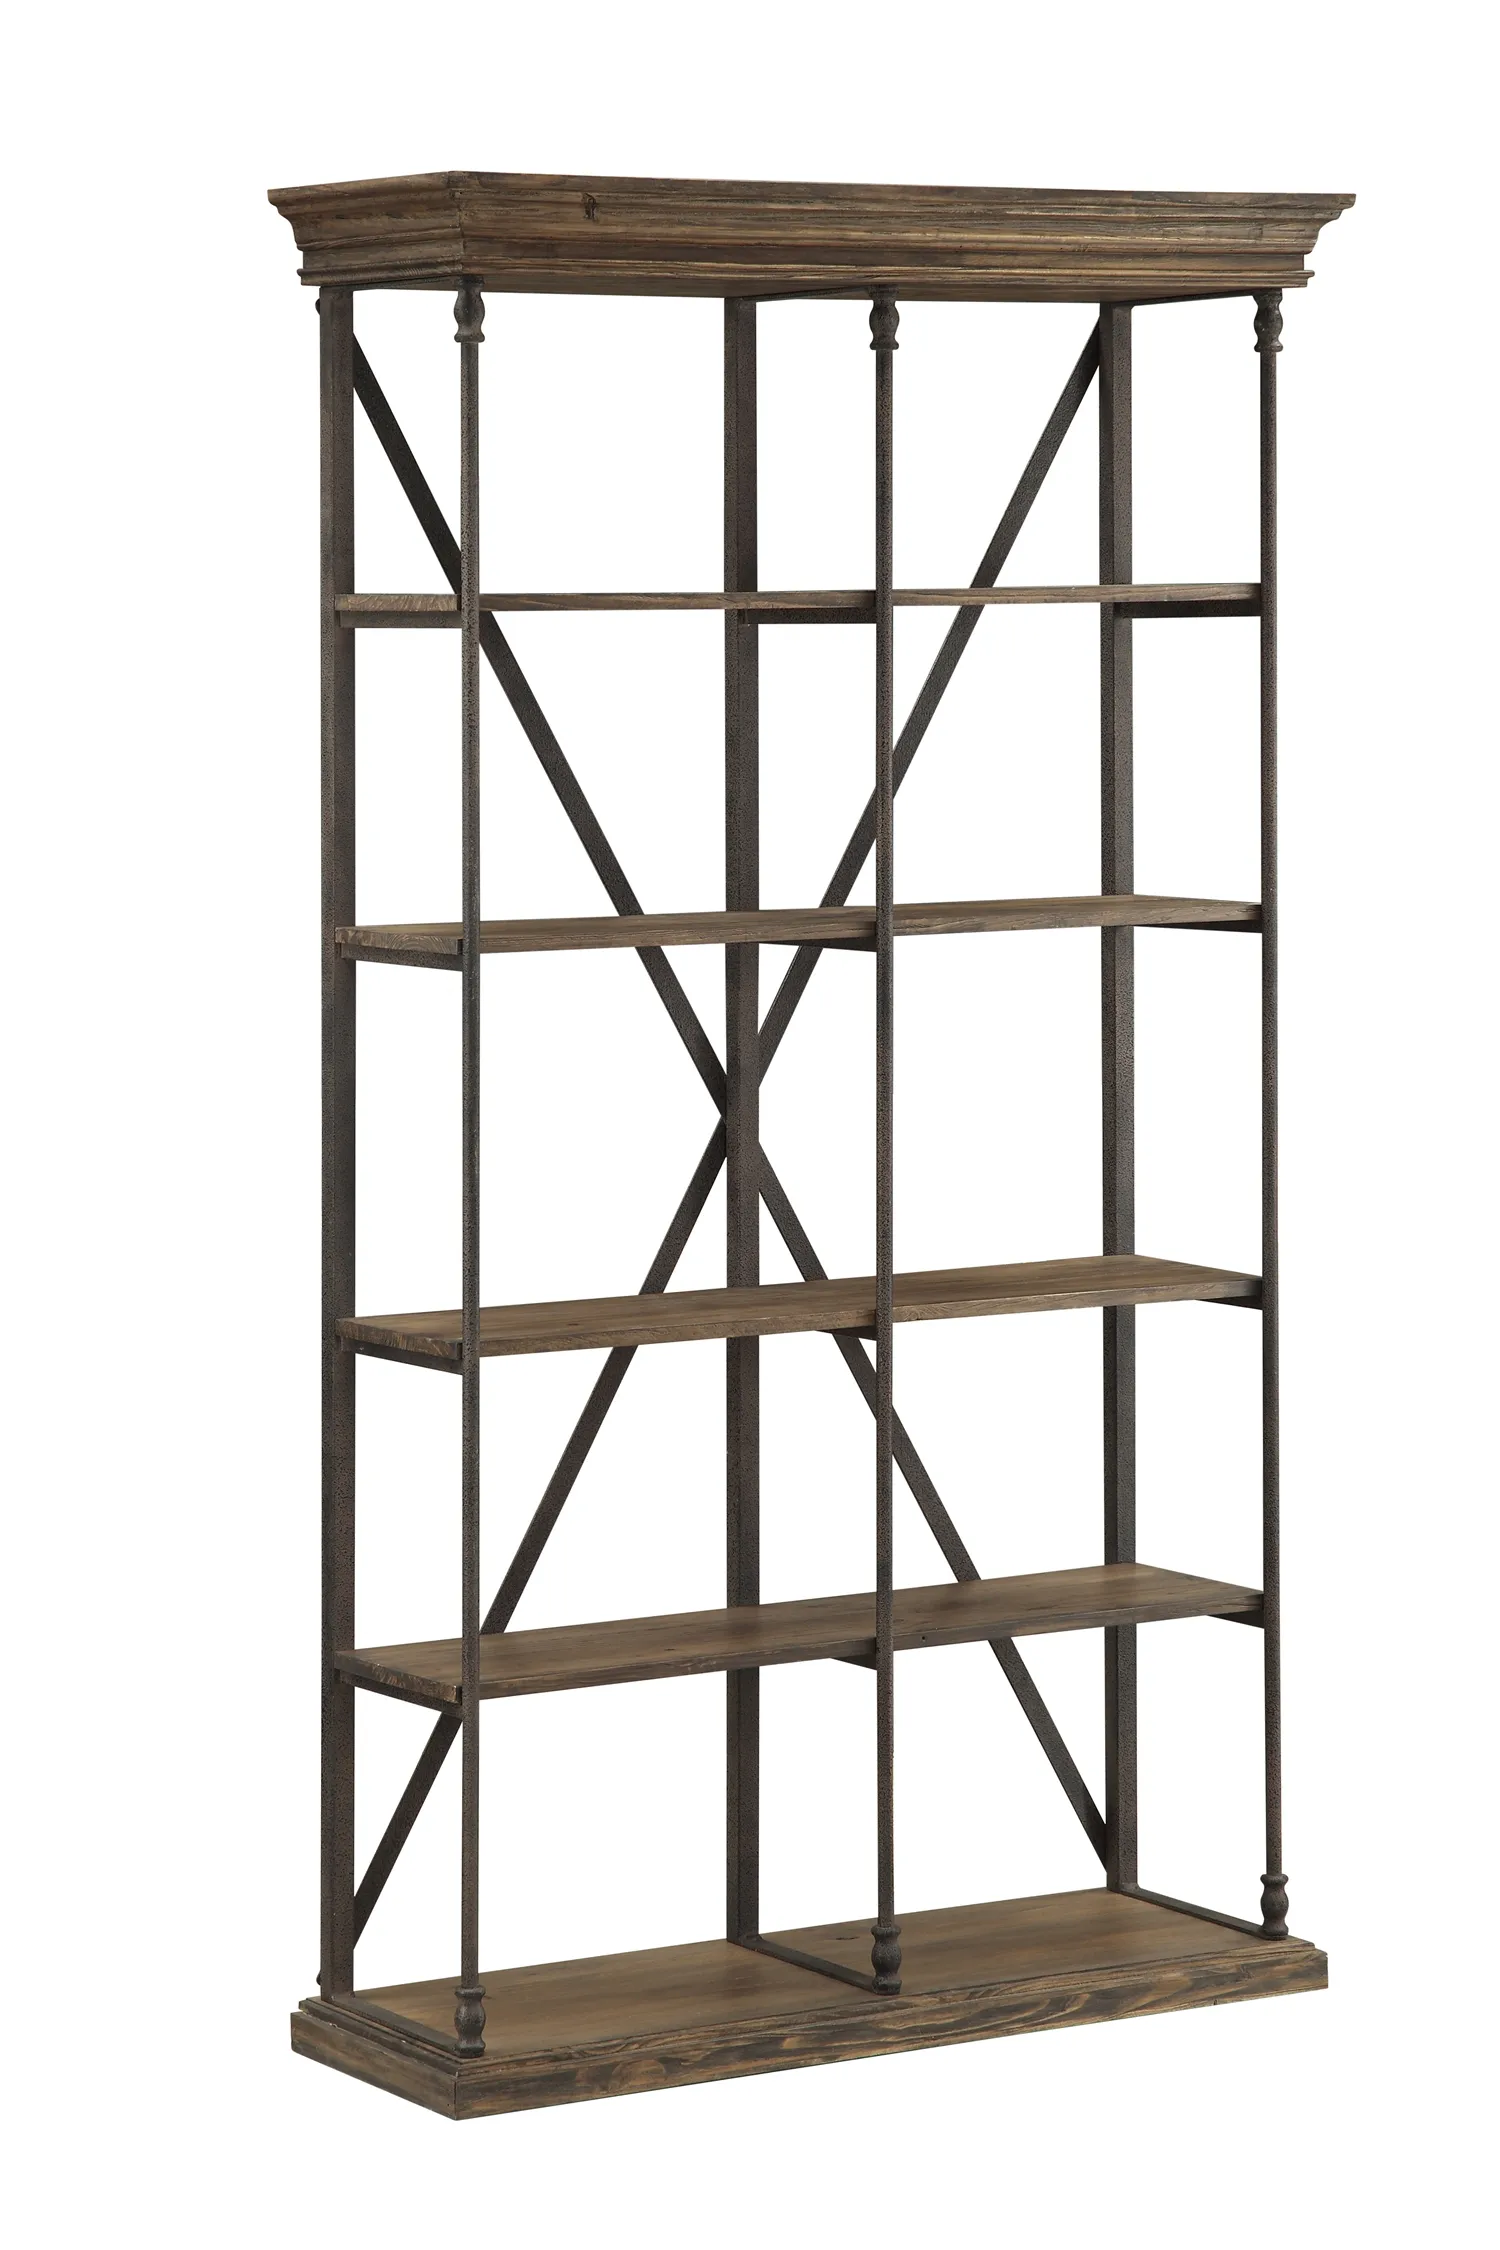 DERBY RUSTIC INDUSTRIAL ETAGERE BOOKSHELF WITH 4 SHELVES - NATURAL BROWN